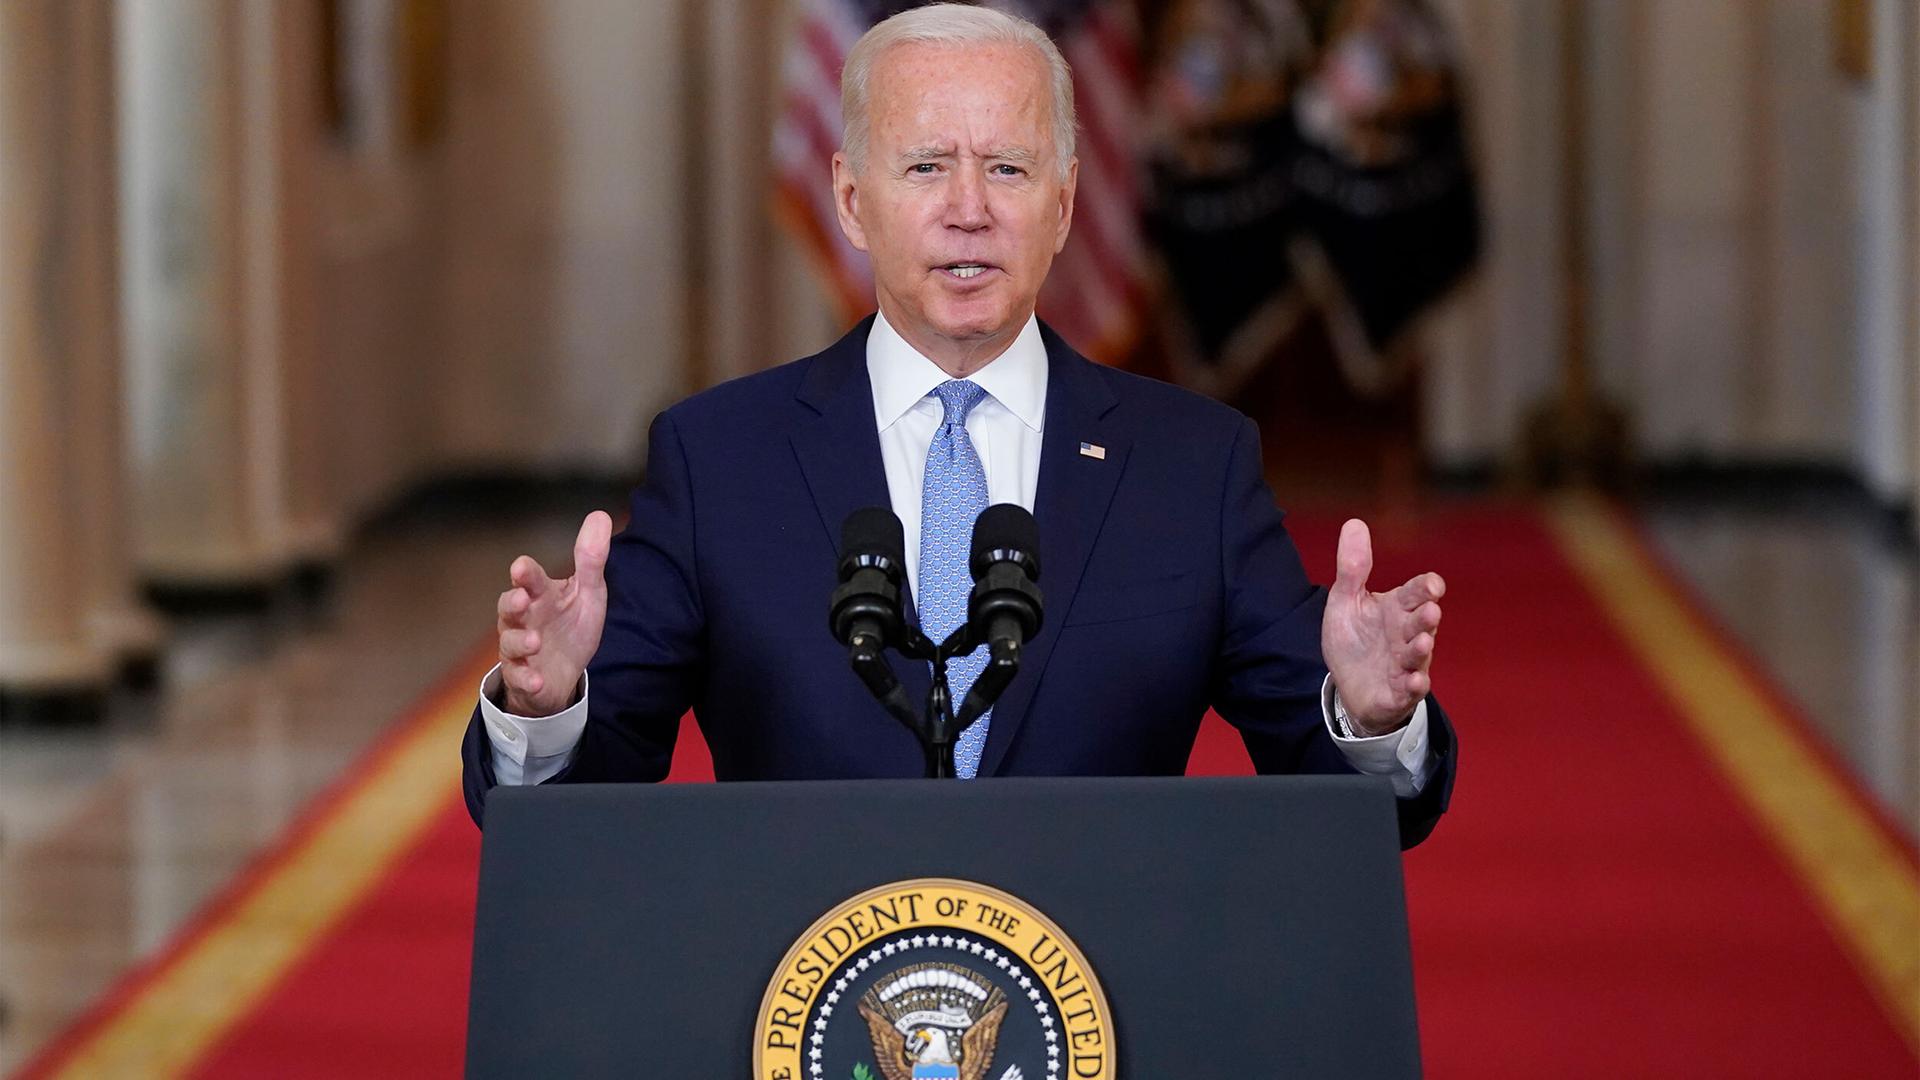 US President Joe Biden is shown standing at a podium and speaking into a microphone with his hands raised slightly.